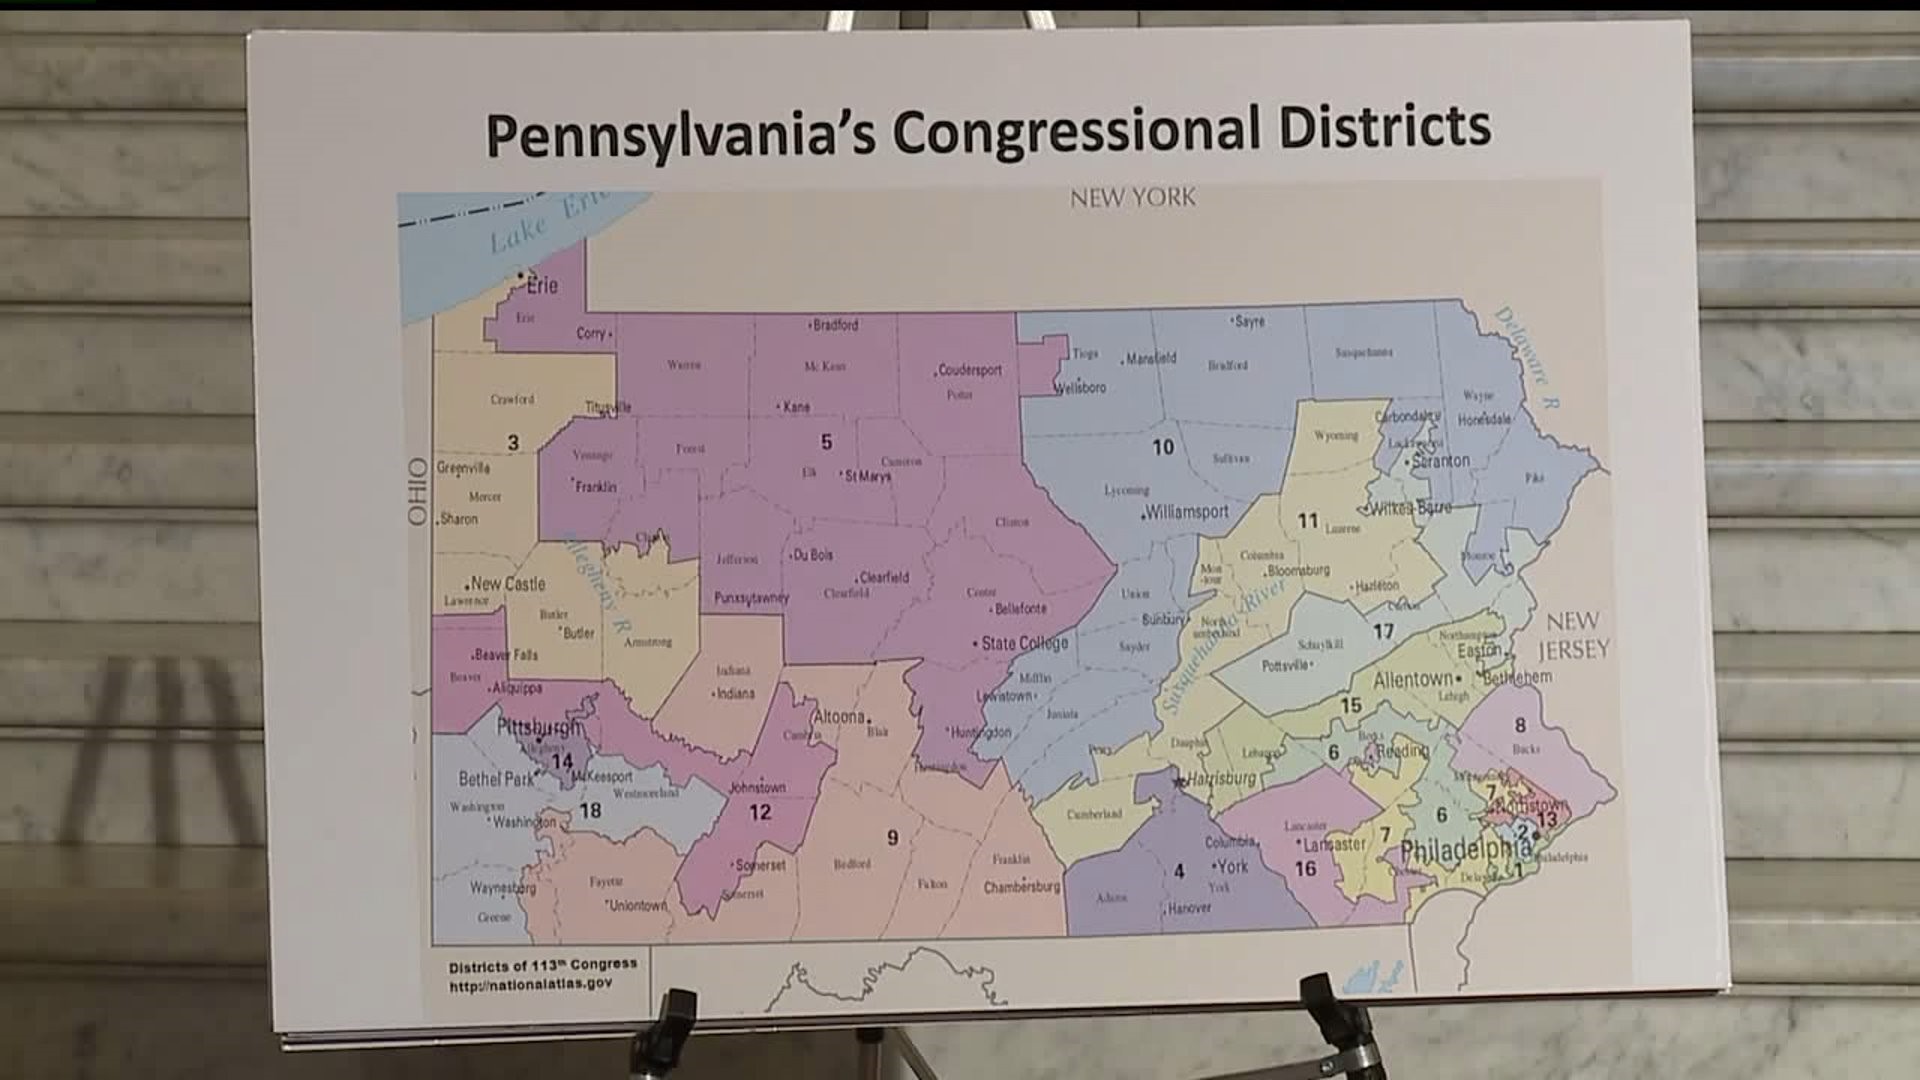 Reaction following PA Supreme Court decision to strike congressional district maps